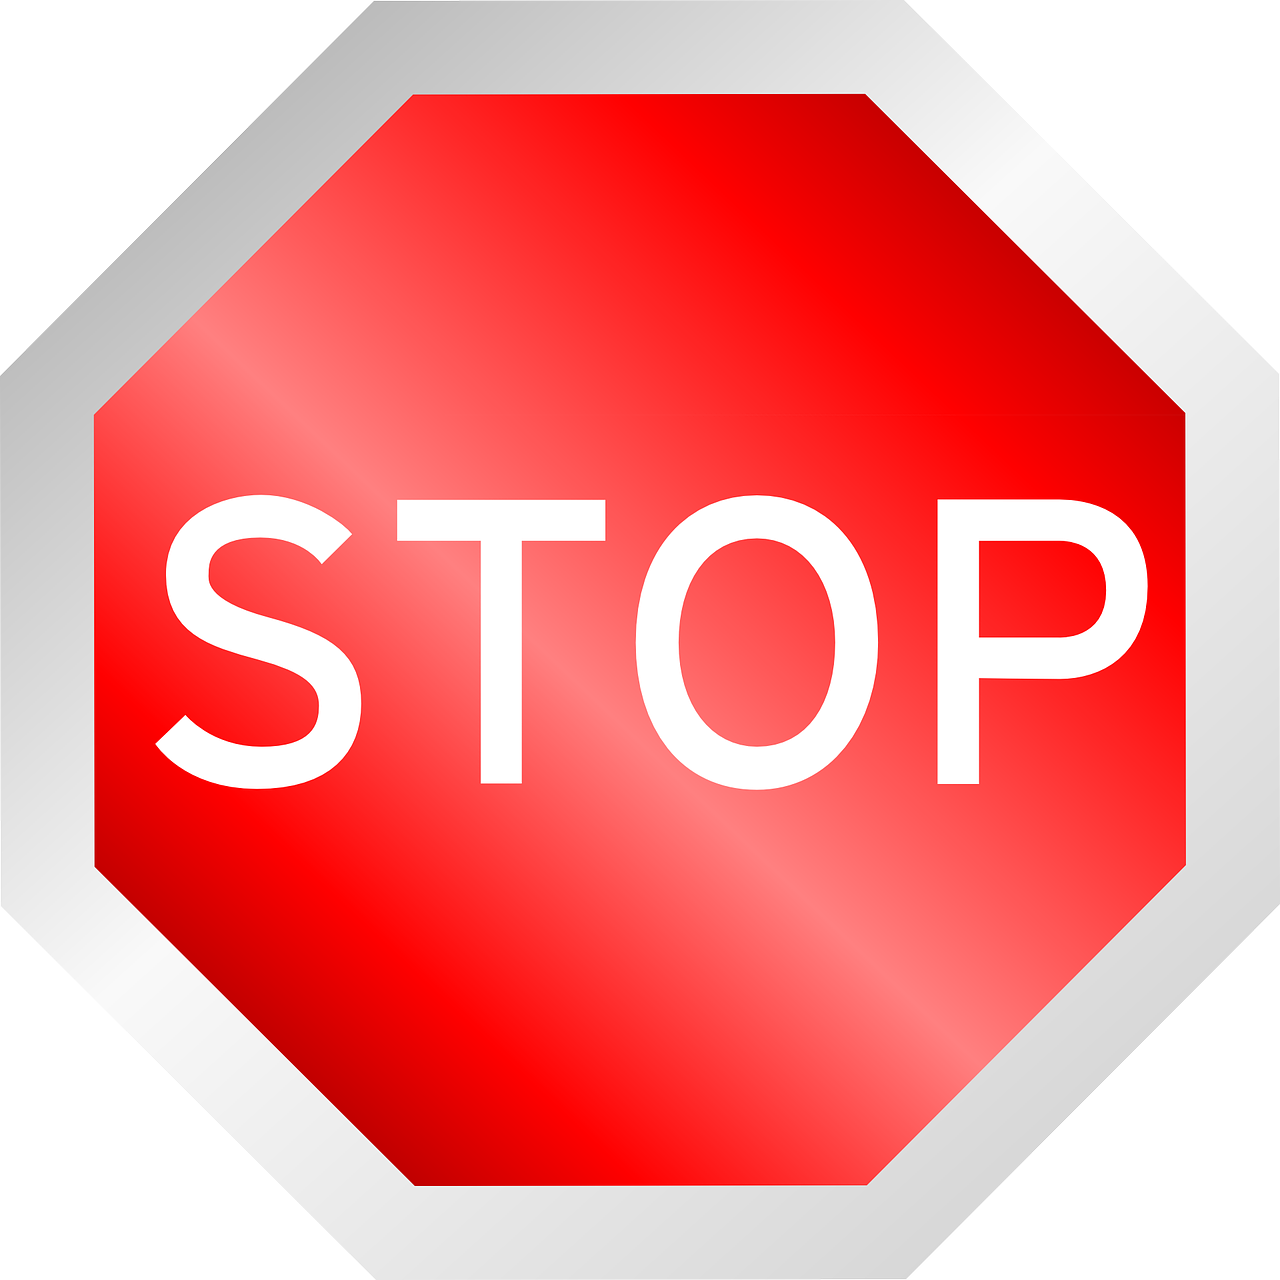 stop octagon traffic sign free photo